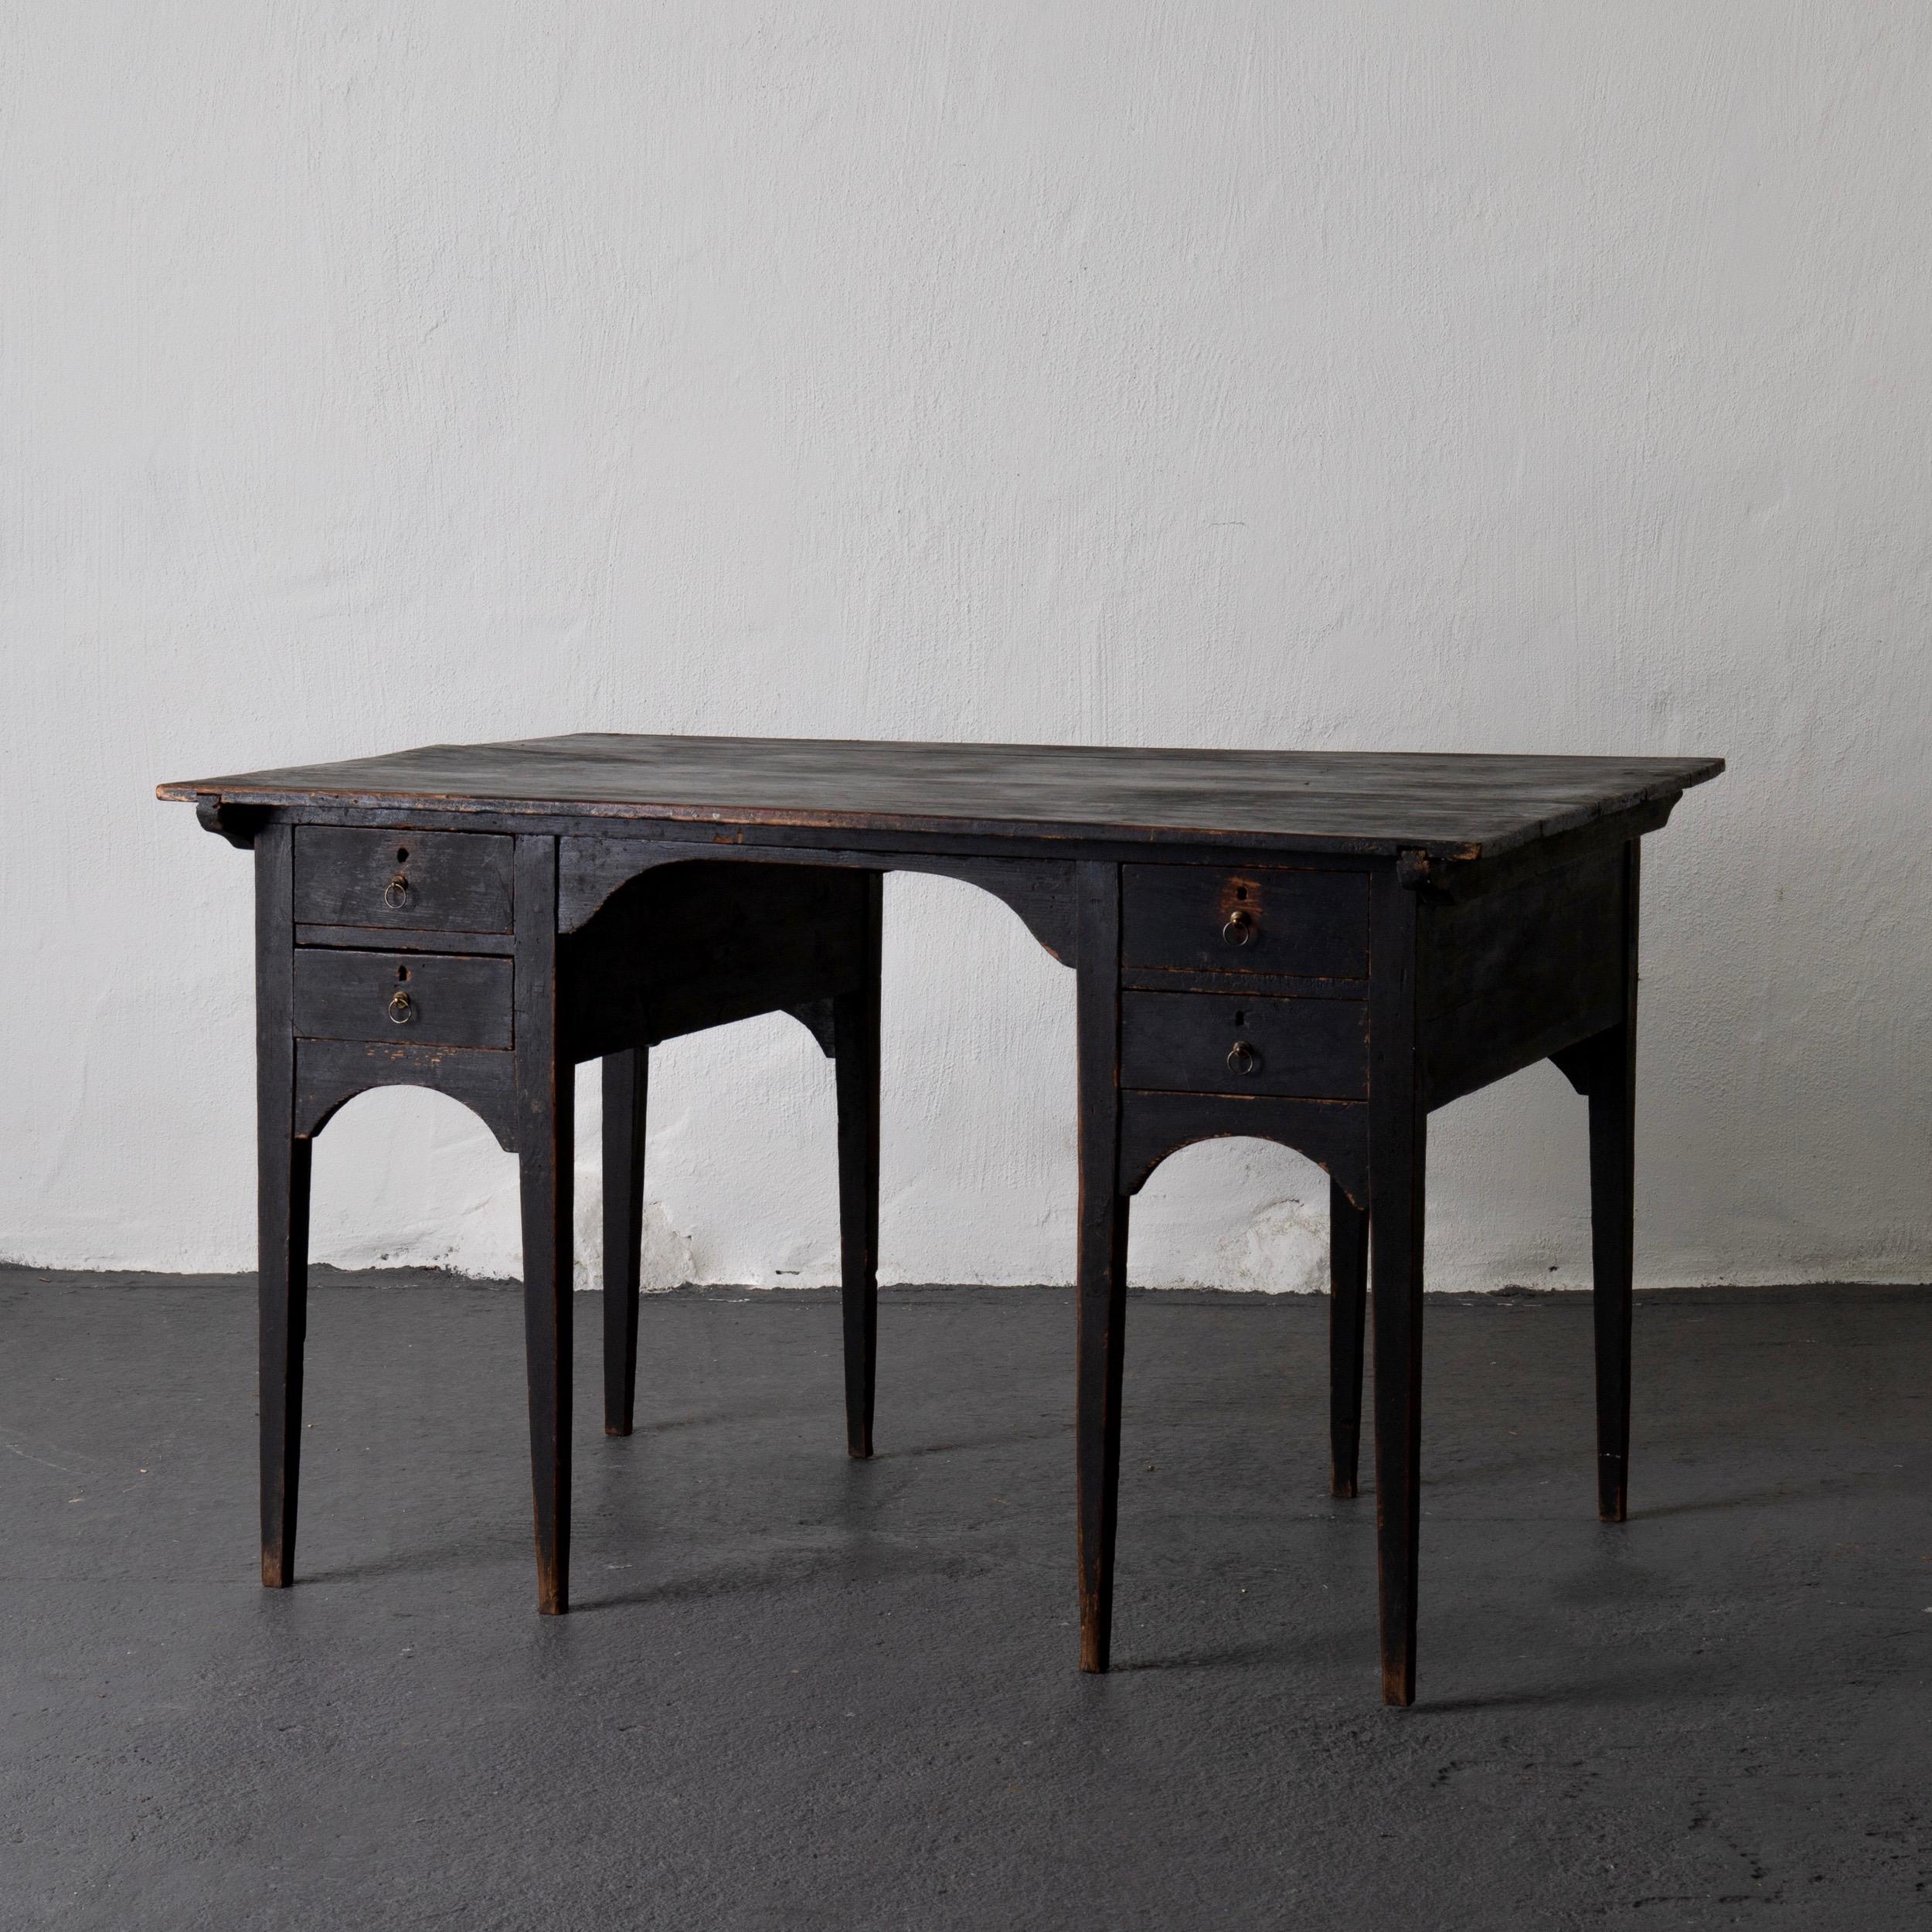 Desk partner Swedish Gustavian black Sweden. A partners desk made during the Gustavian period in Sweden. Painted in our Laserow black. Brass hardware on the eight drawers, four on each side. Square legs tapered. Height from floor to apron: